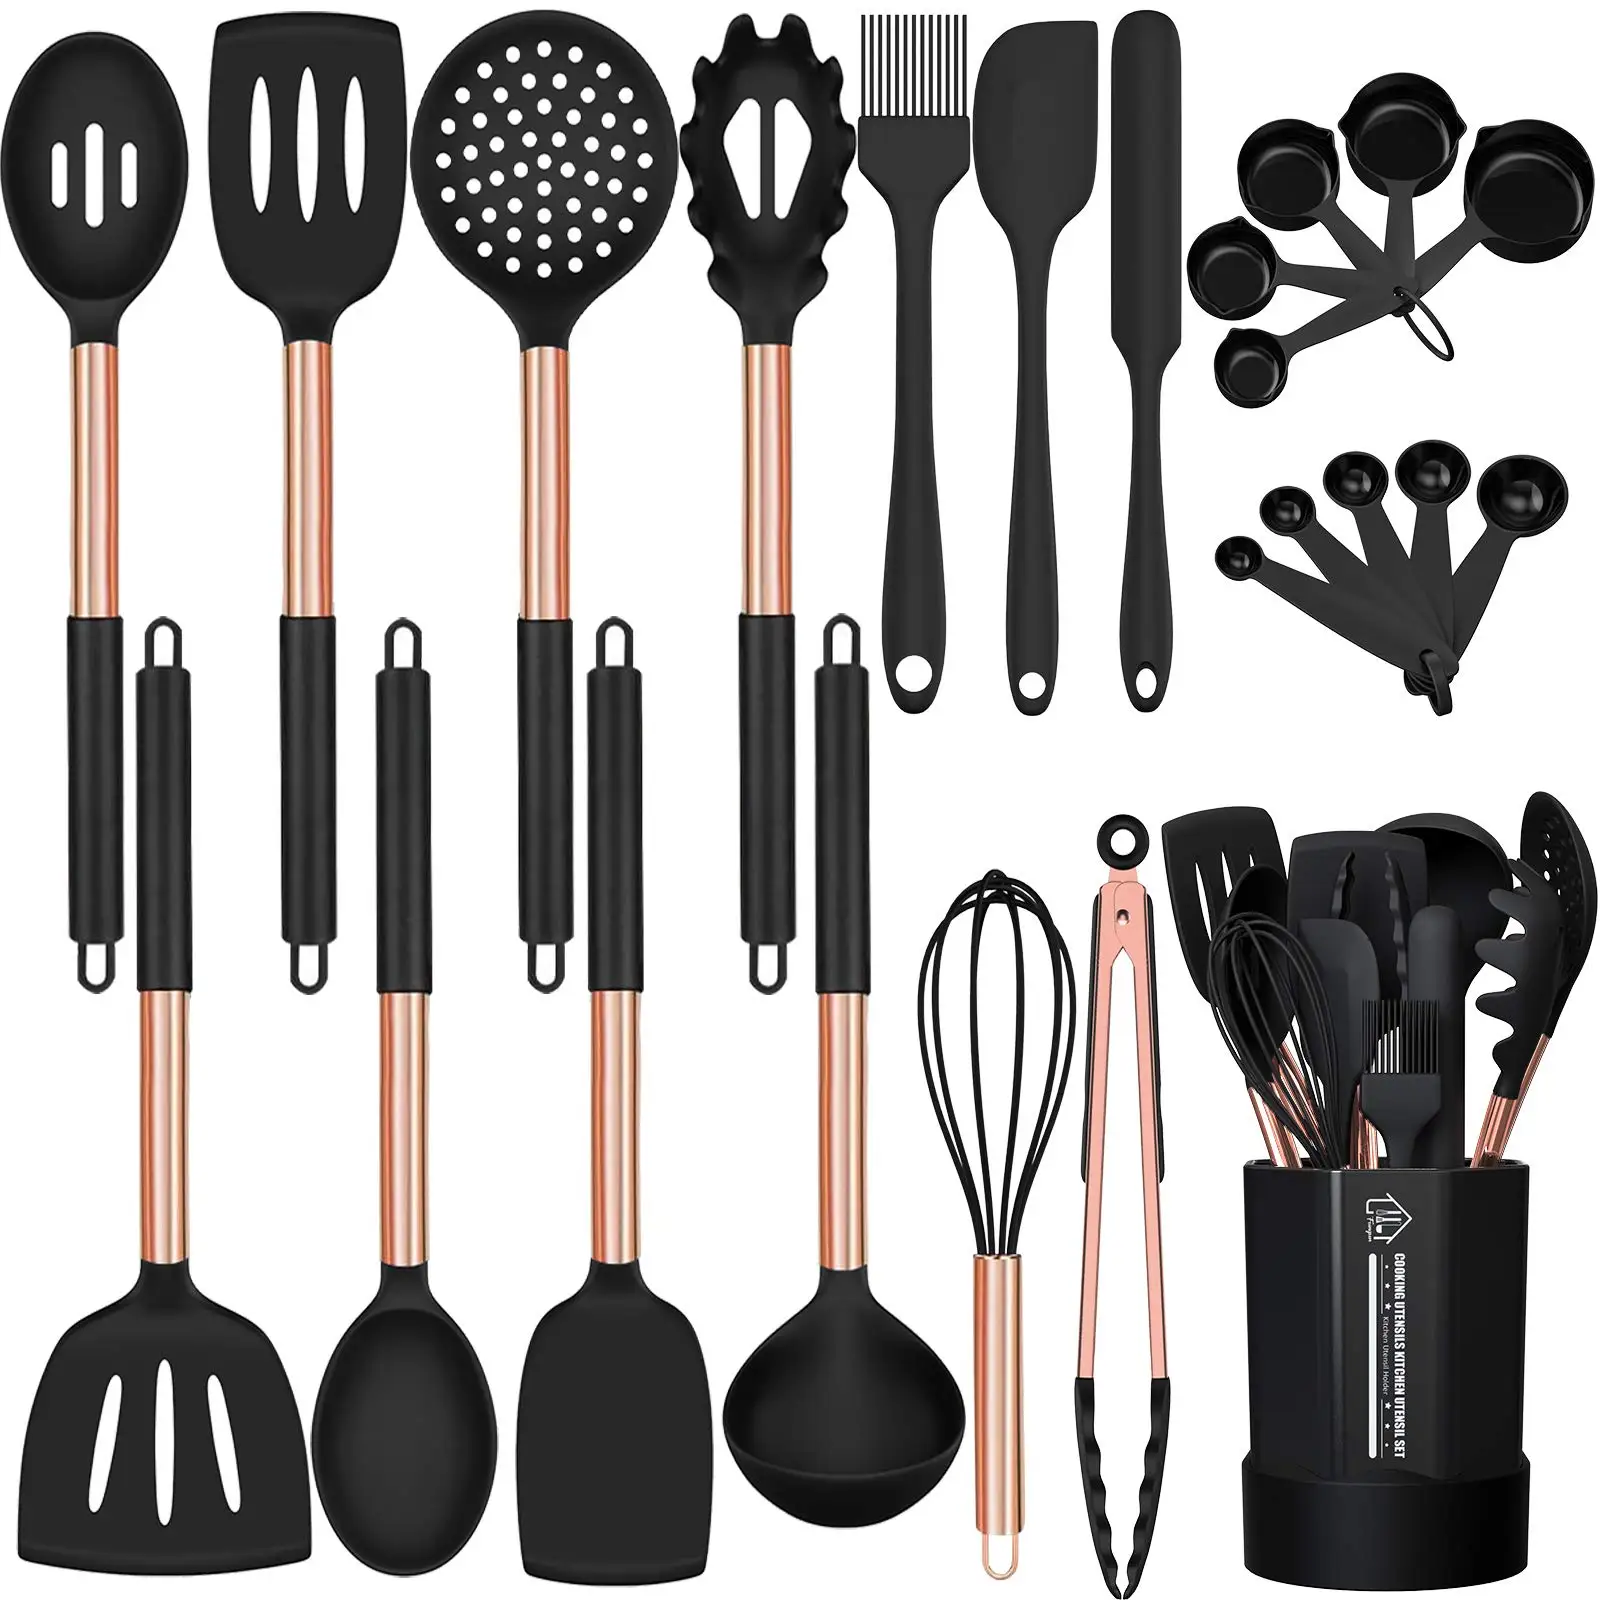 24pcs Silicone Non-stick Heat Resistant Best Cooking Utensil Spatulas Set with Copper Stainless Steel Handle